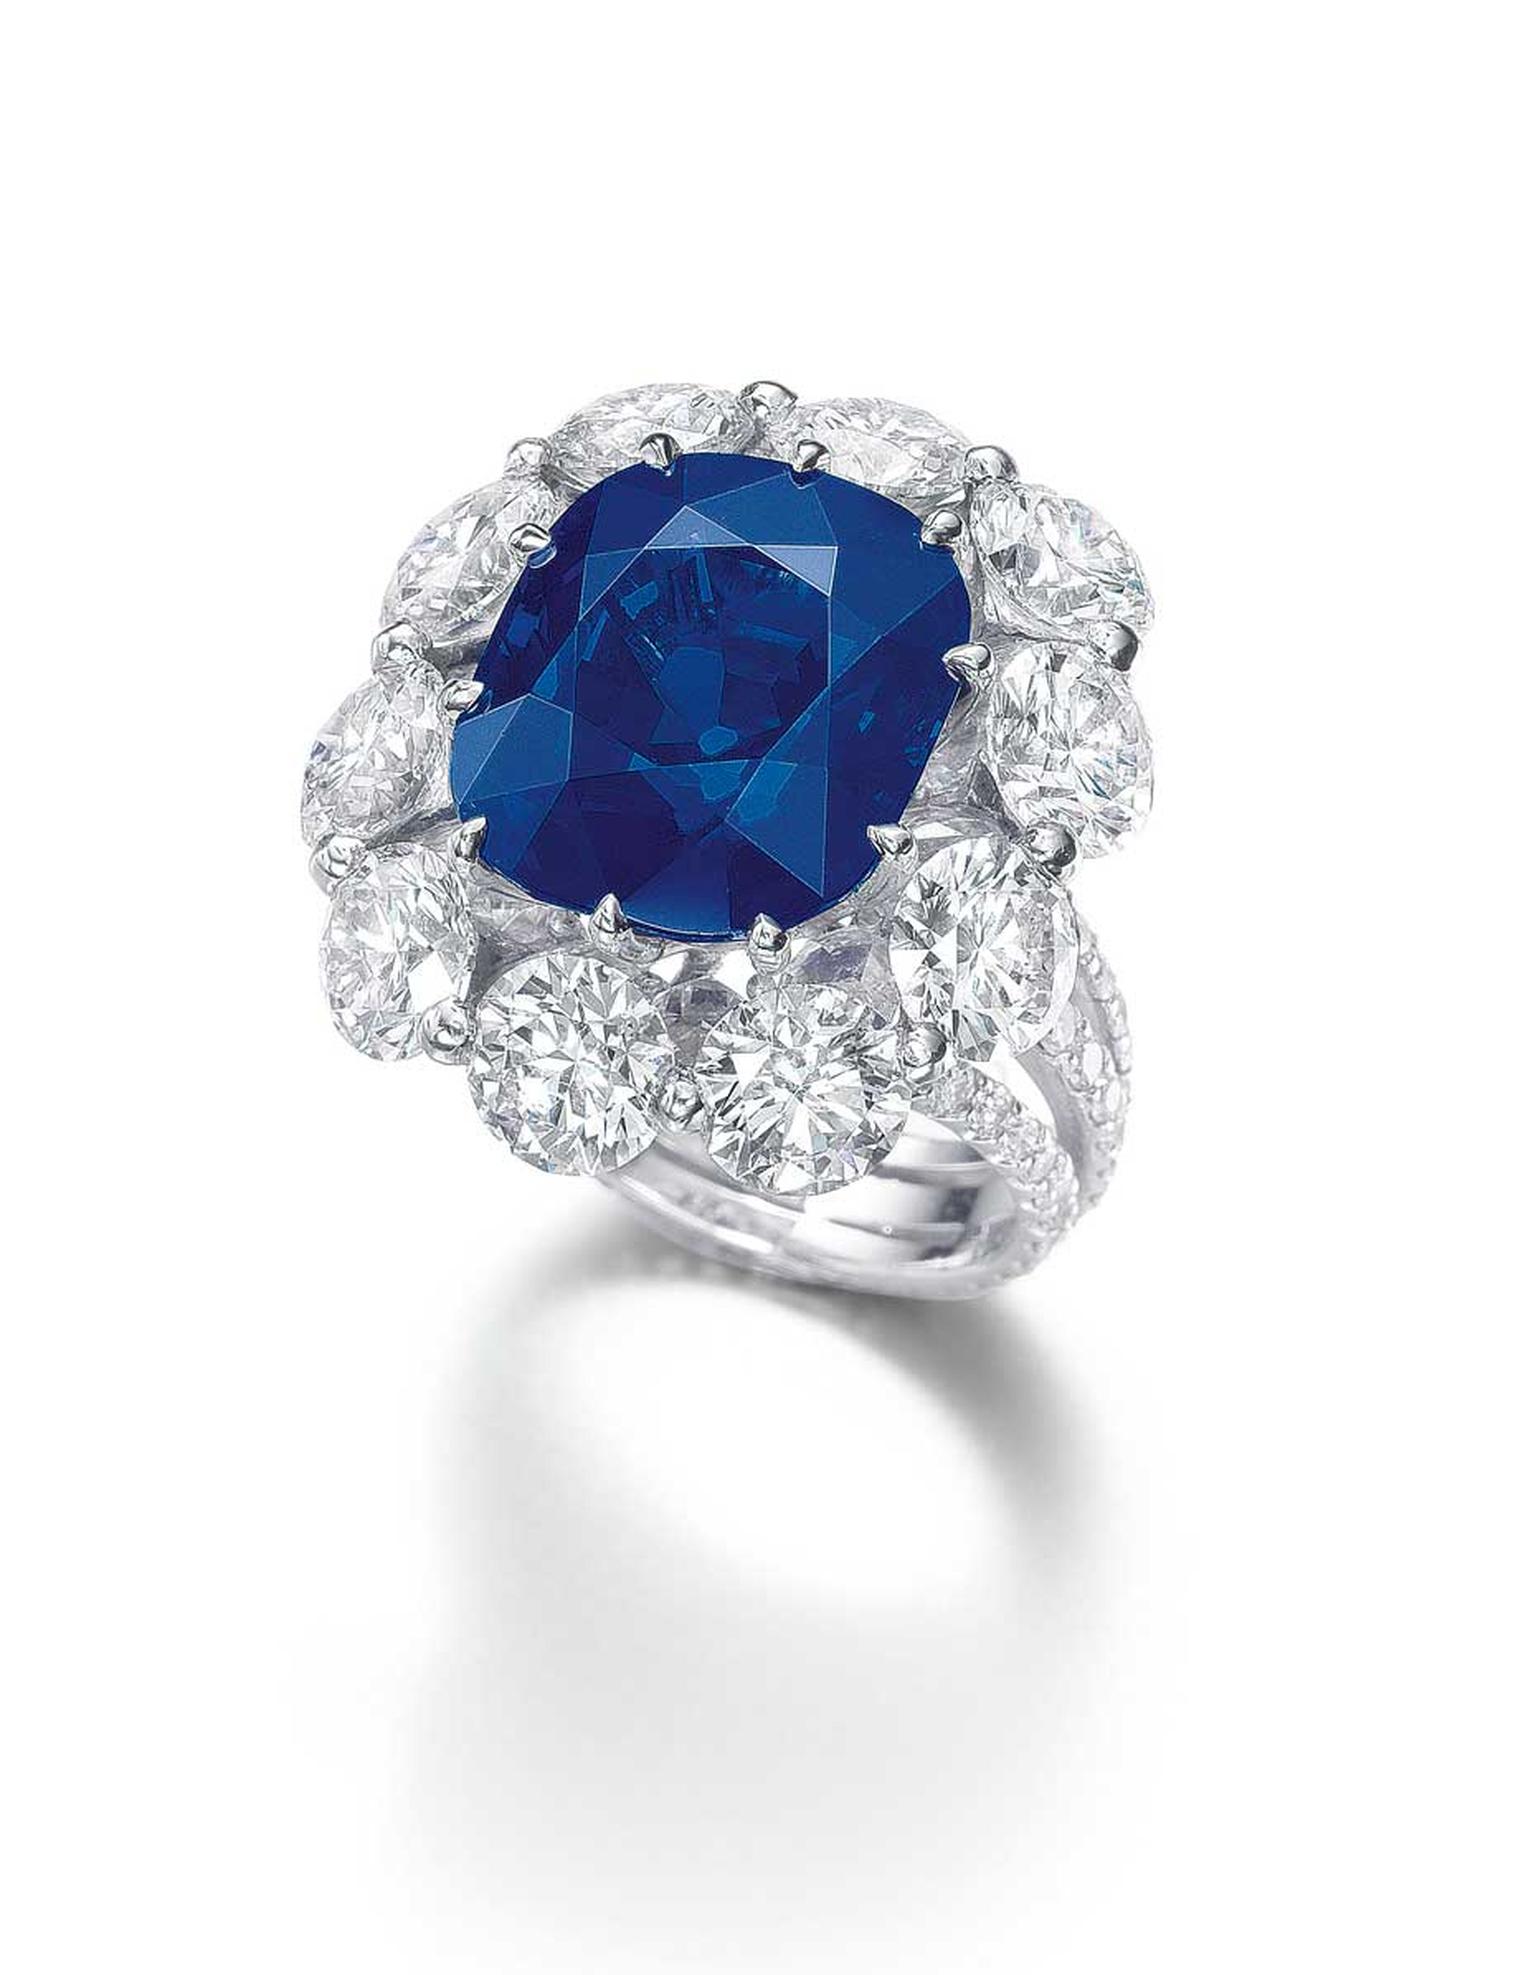 A Kashmir sapphire and diamond ring (20.04ct) was sold for US$2.6 million.